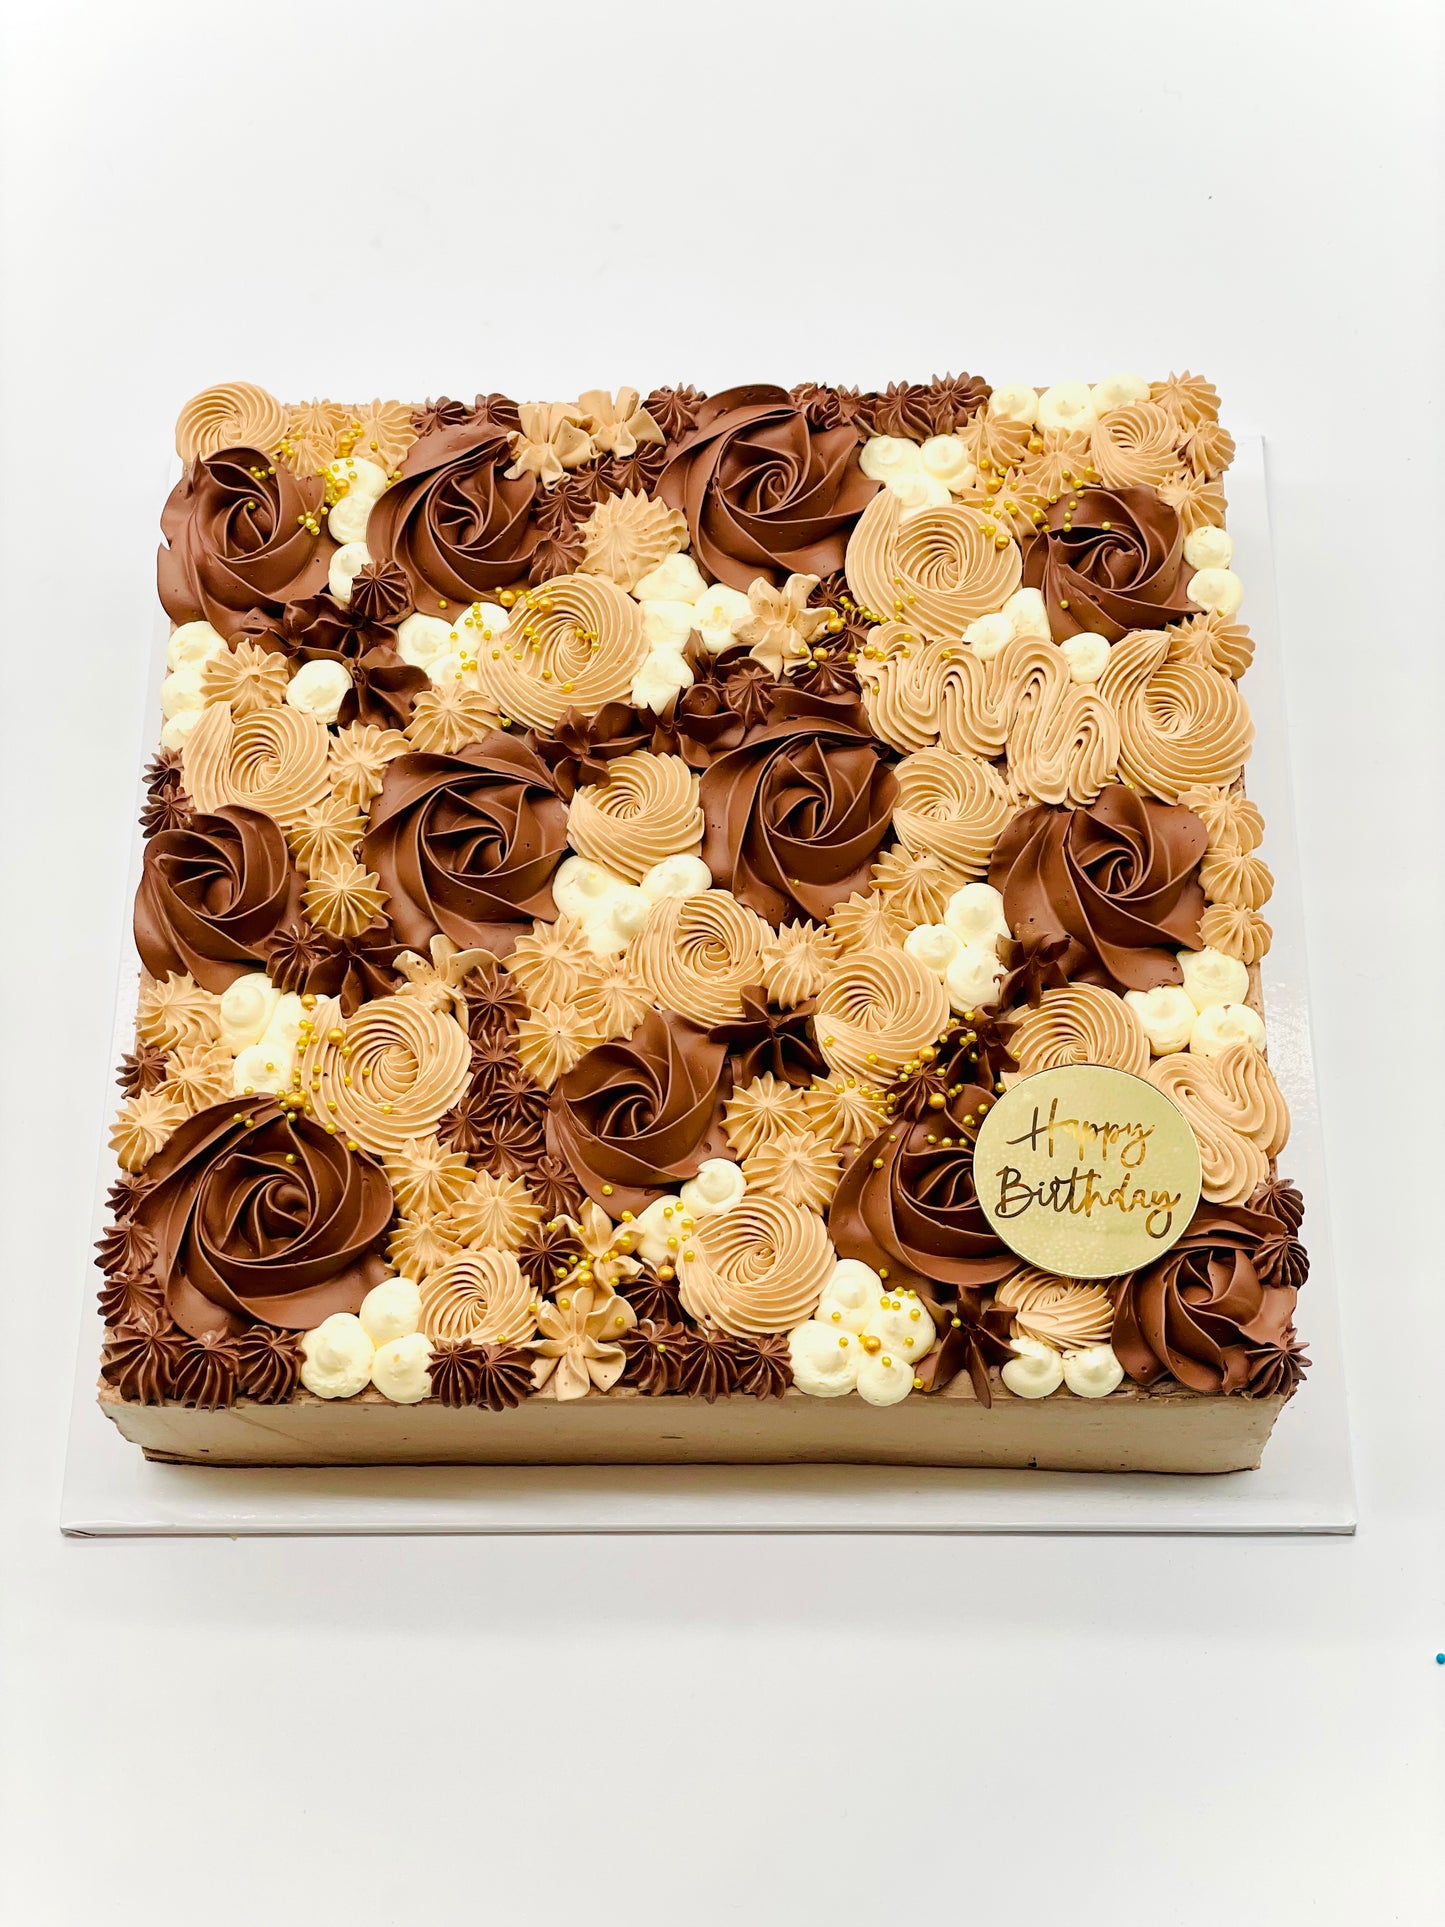 Load image into Gallery viewer, Chocolate Delight Slab Cake
